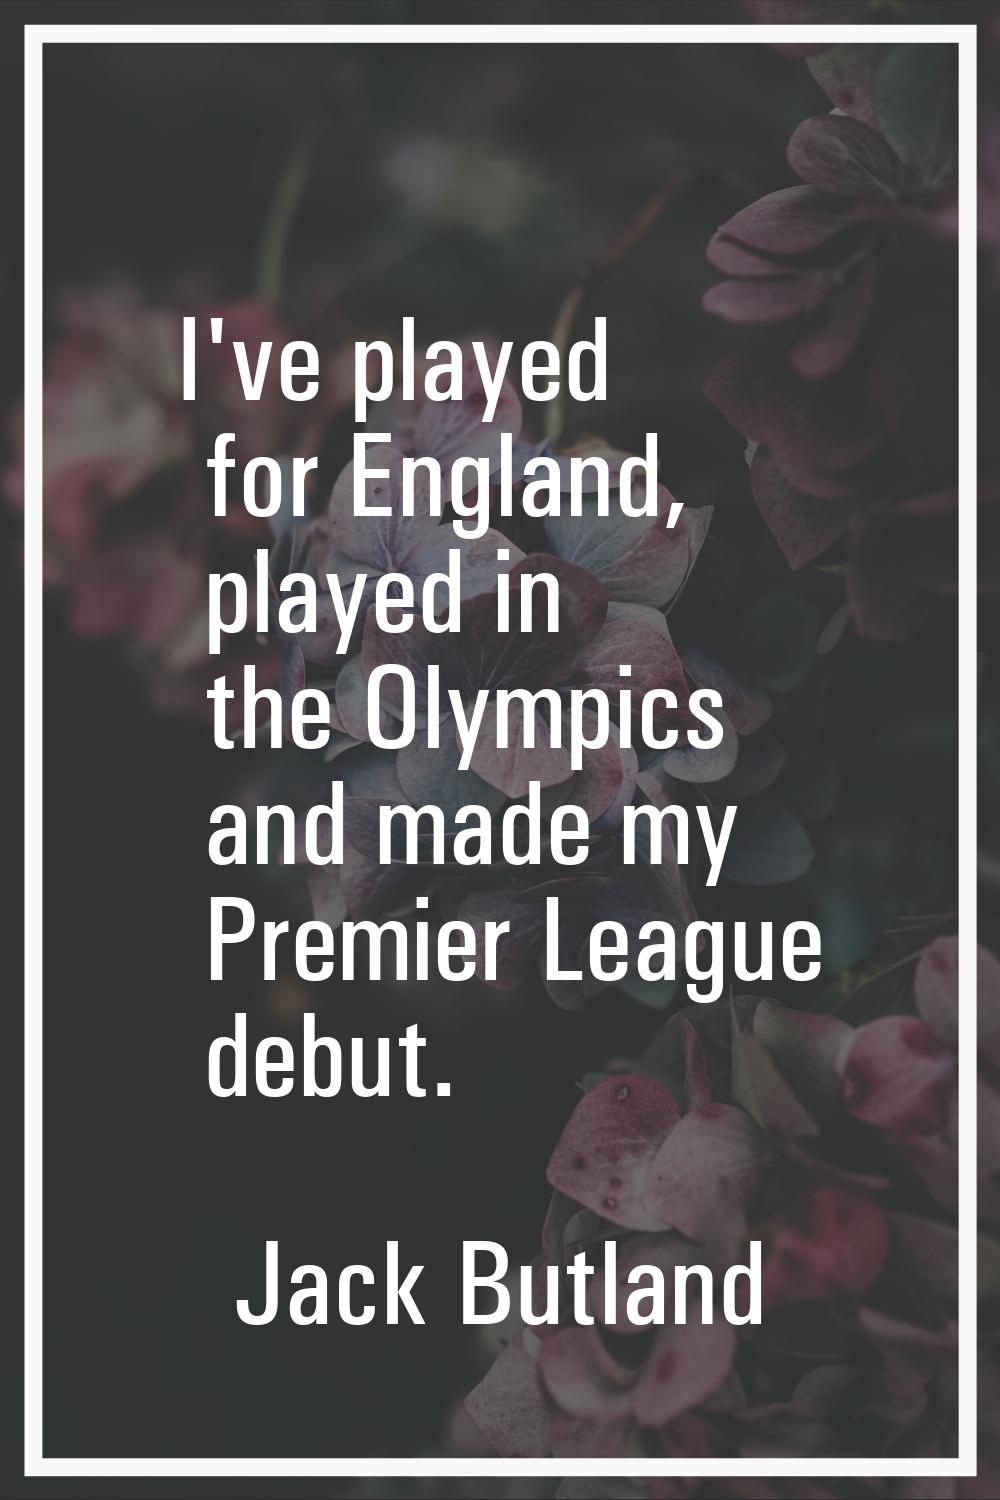 I've played for England, played in the Olympics and made my Premier League debut.